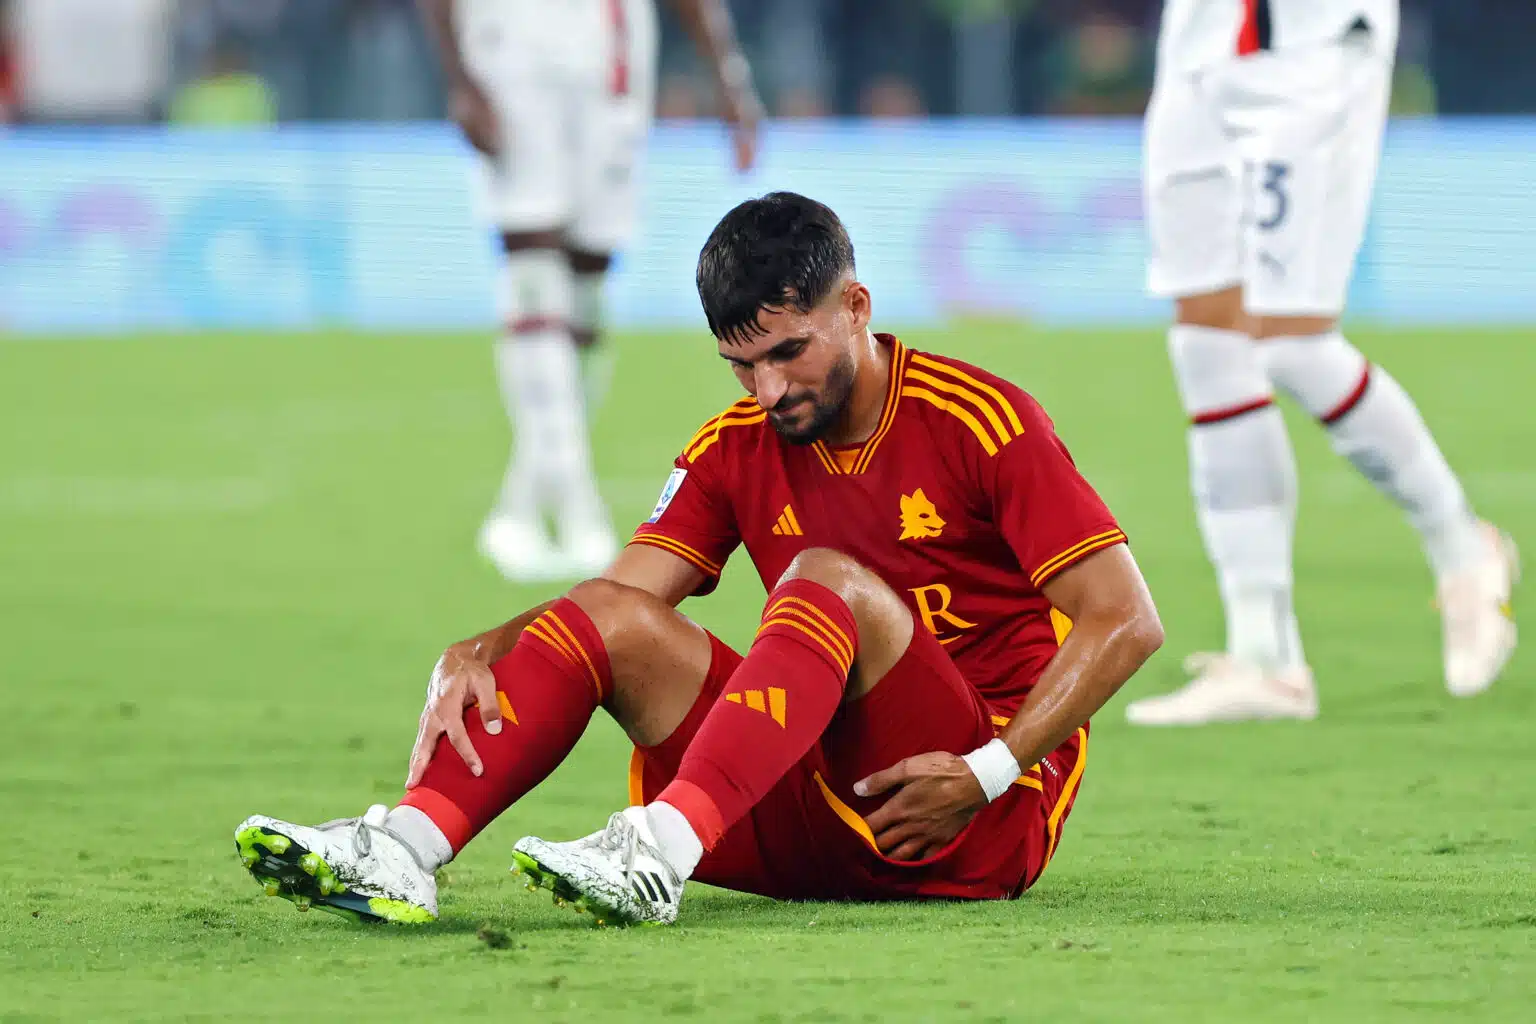 Houssem Aouar and Nicola Zalewski exited Friday’s loss to Milan due to muscular injuries, but they could be present once Serie A resumes in two weeks.